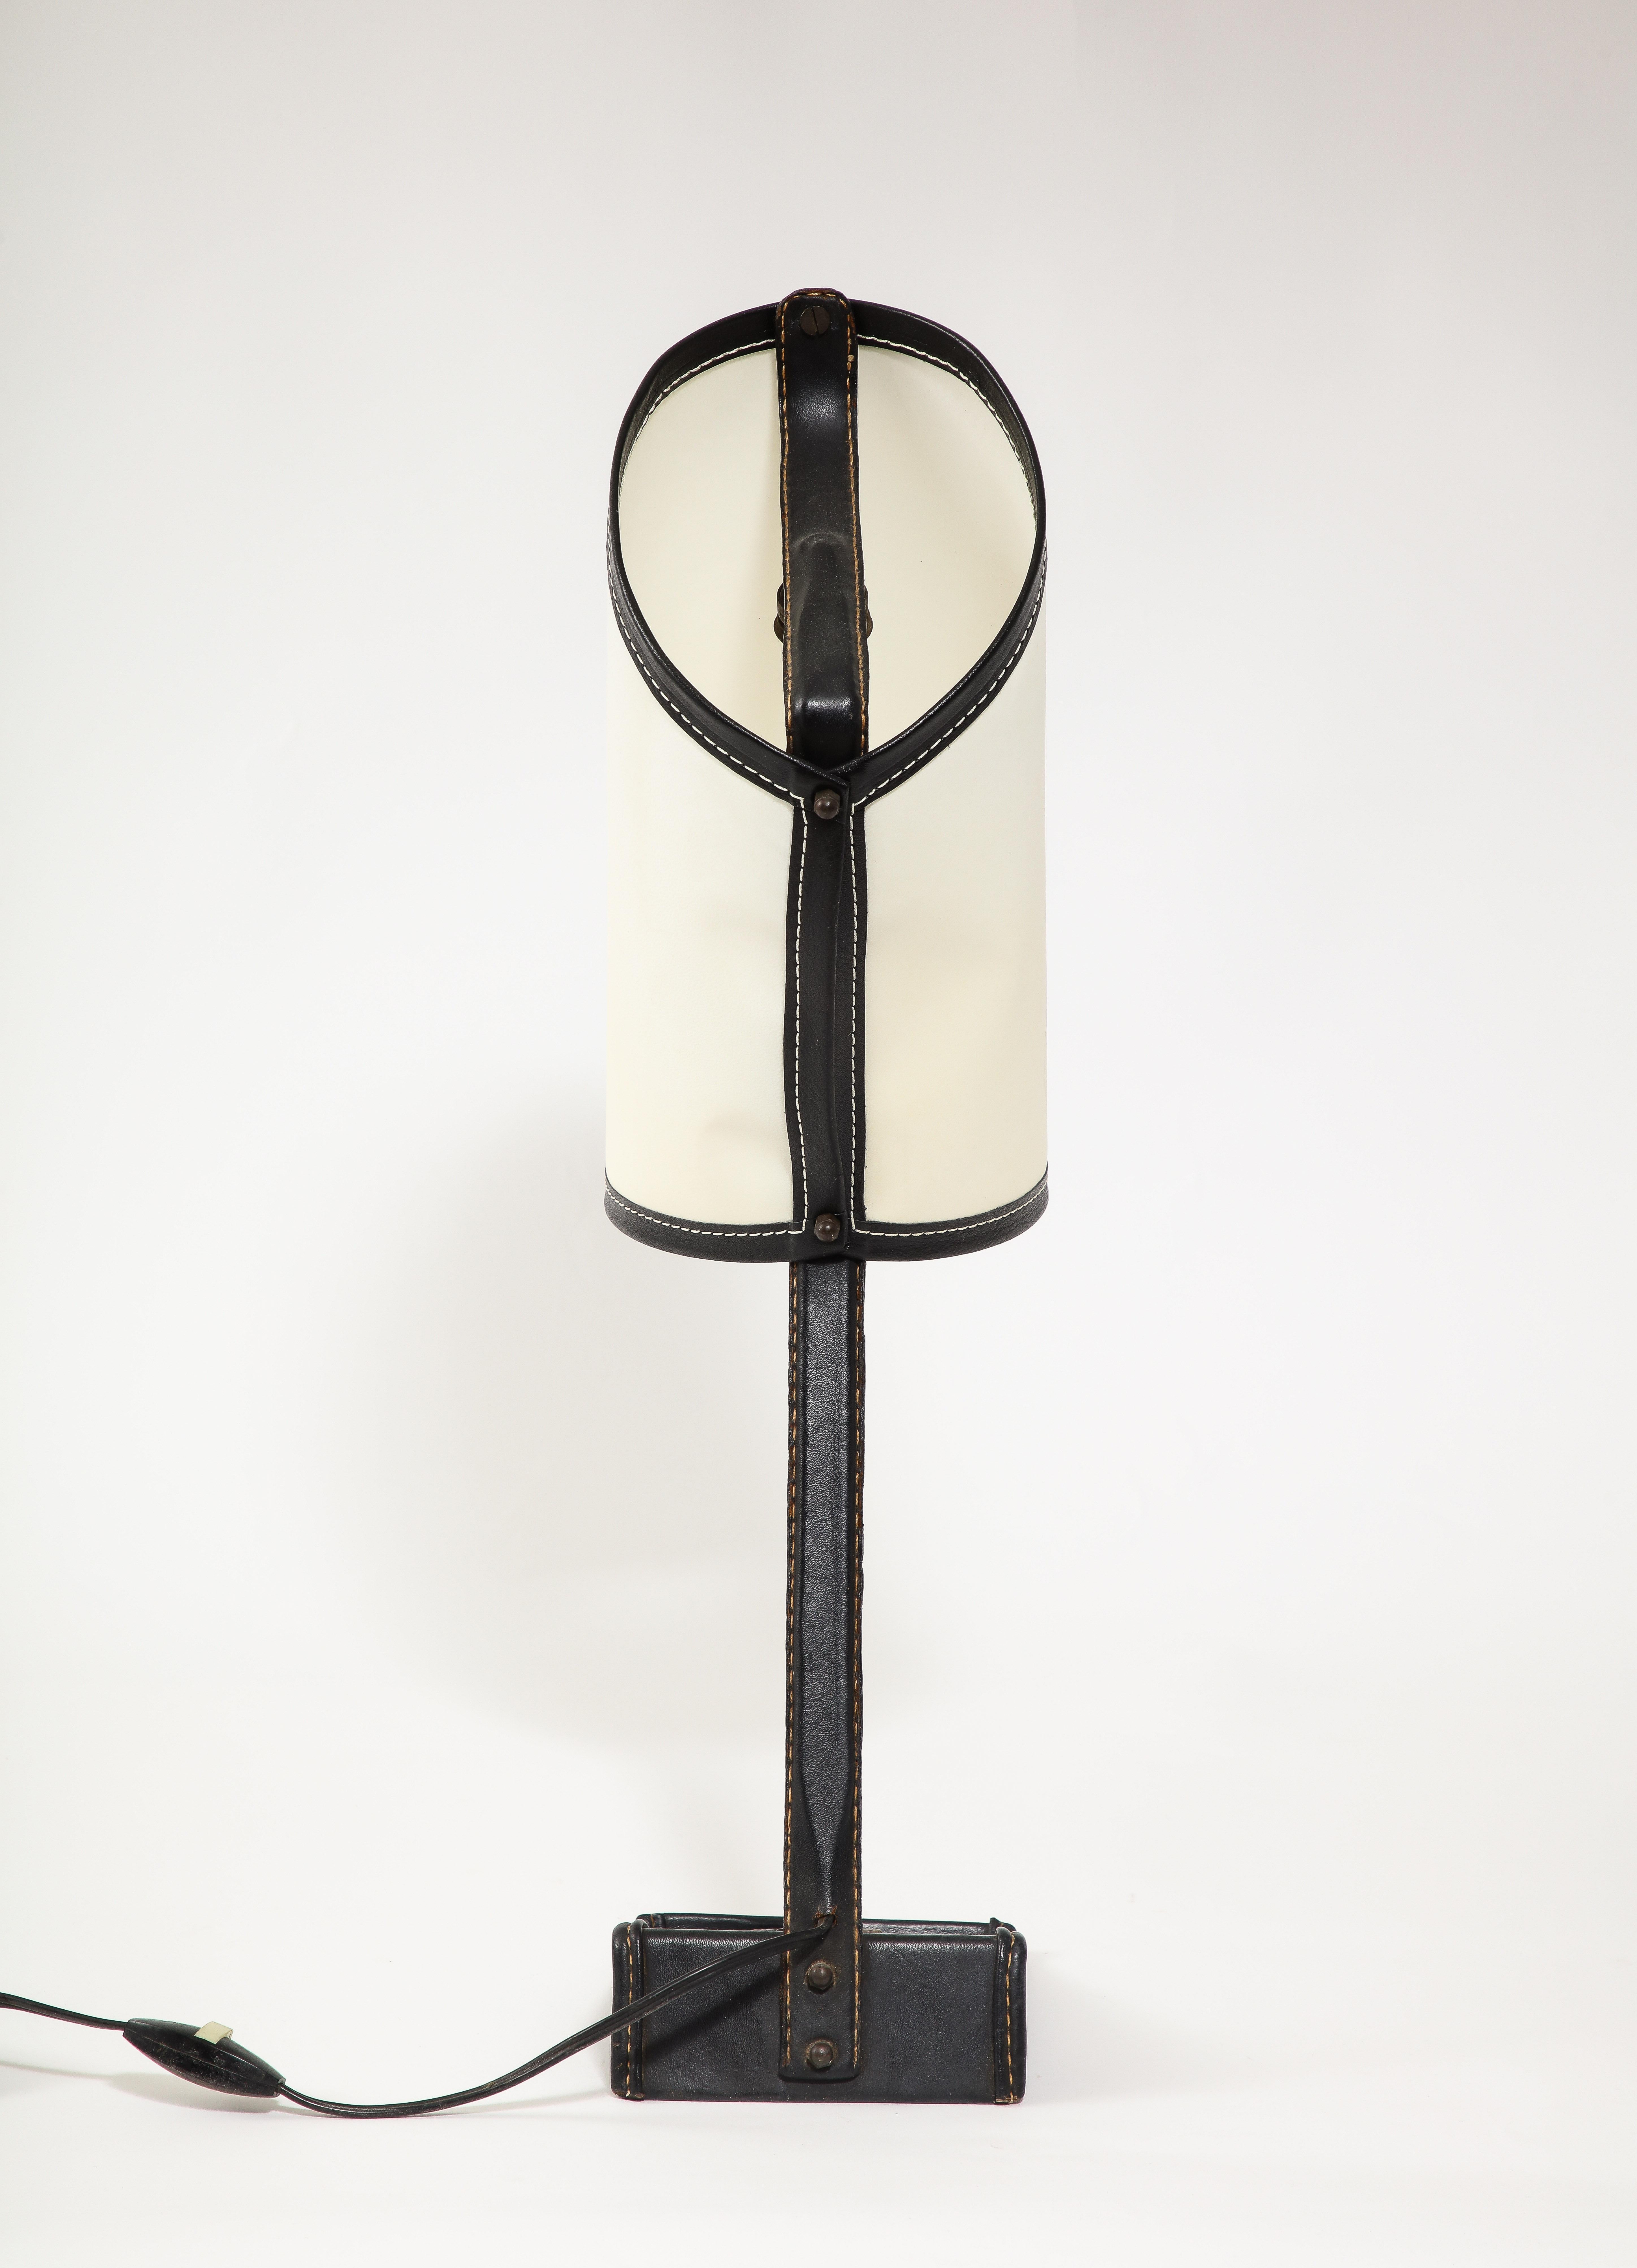 Mid-Century Modern Jacques Adnet Curved Desk Lamp With Black Leather Trim, France 1950's For Sale